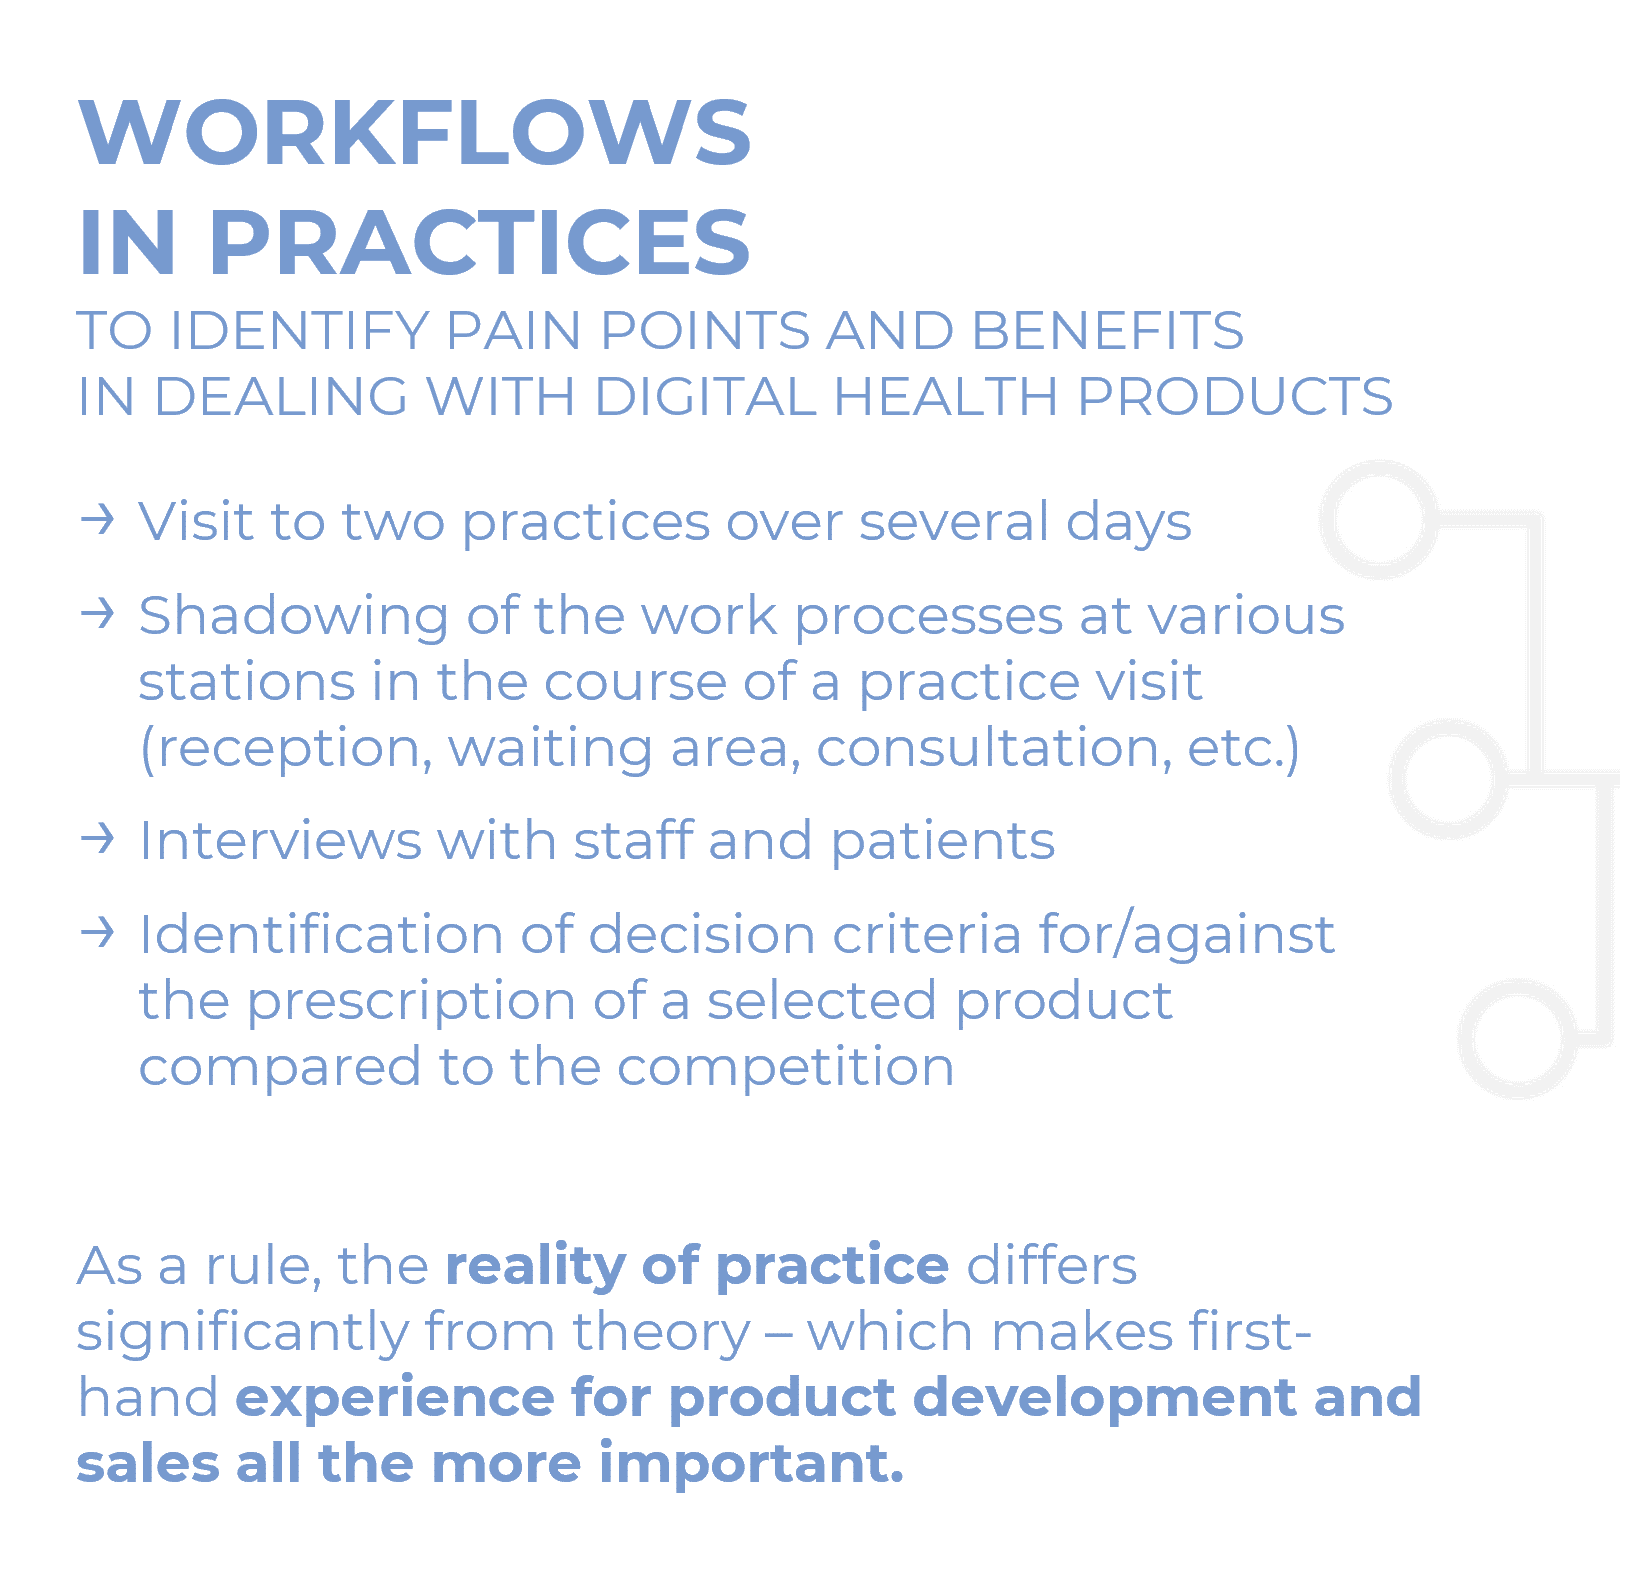 WORKFLOWS IN PRACTICES TO IDENTIFY PAIN POINTS AND BENEFITS IN DEALING WITH DIGITAL HEALTH PRODUCTS